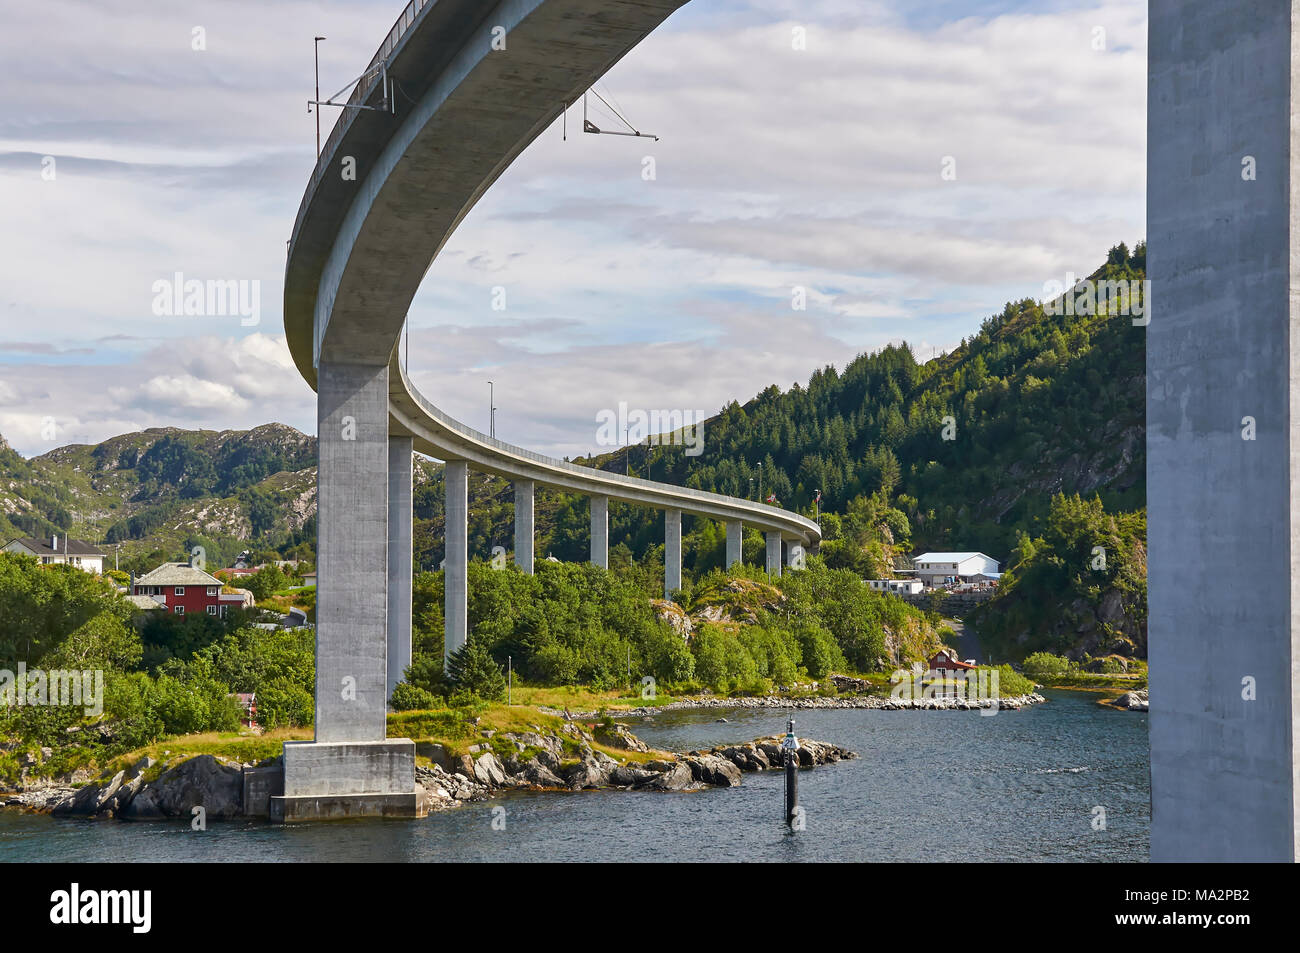 On a Vessel passing under the Maloy Road Bridge which connects the Islands of Maloya and Vagsoy on the Western Coast of Norway, near Bergen. Stock Photo